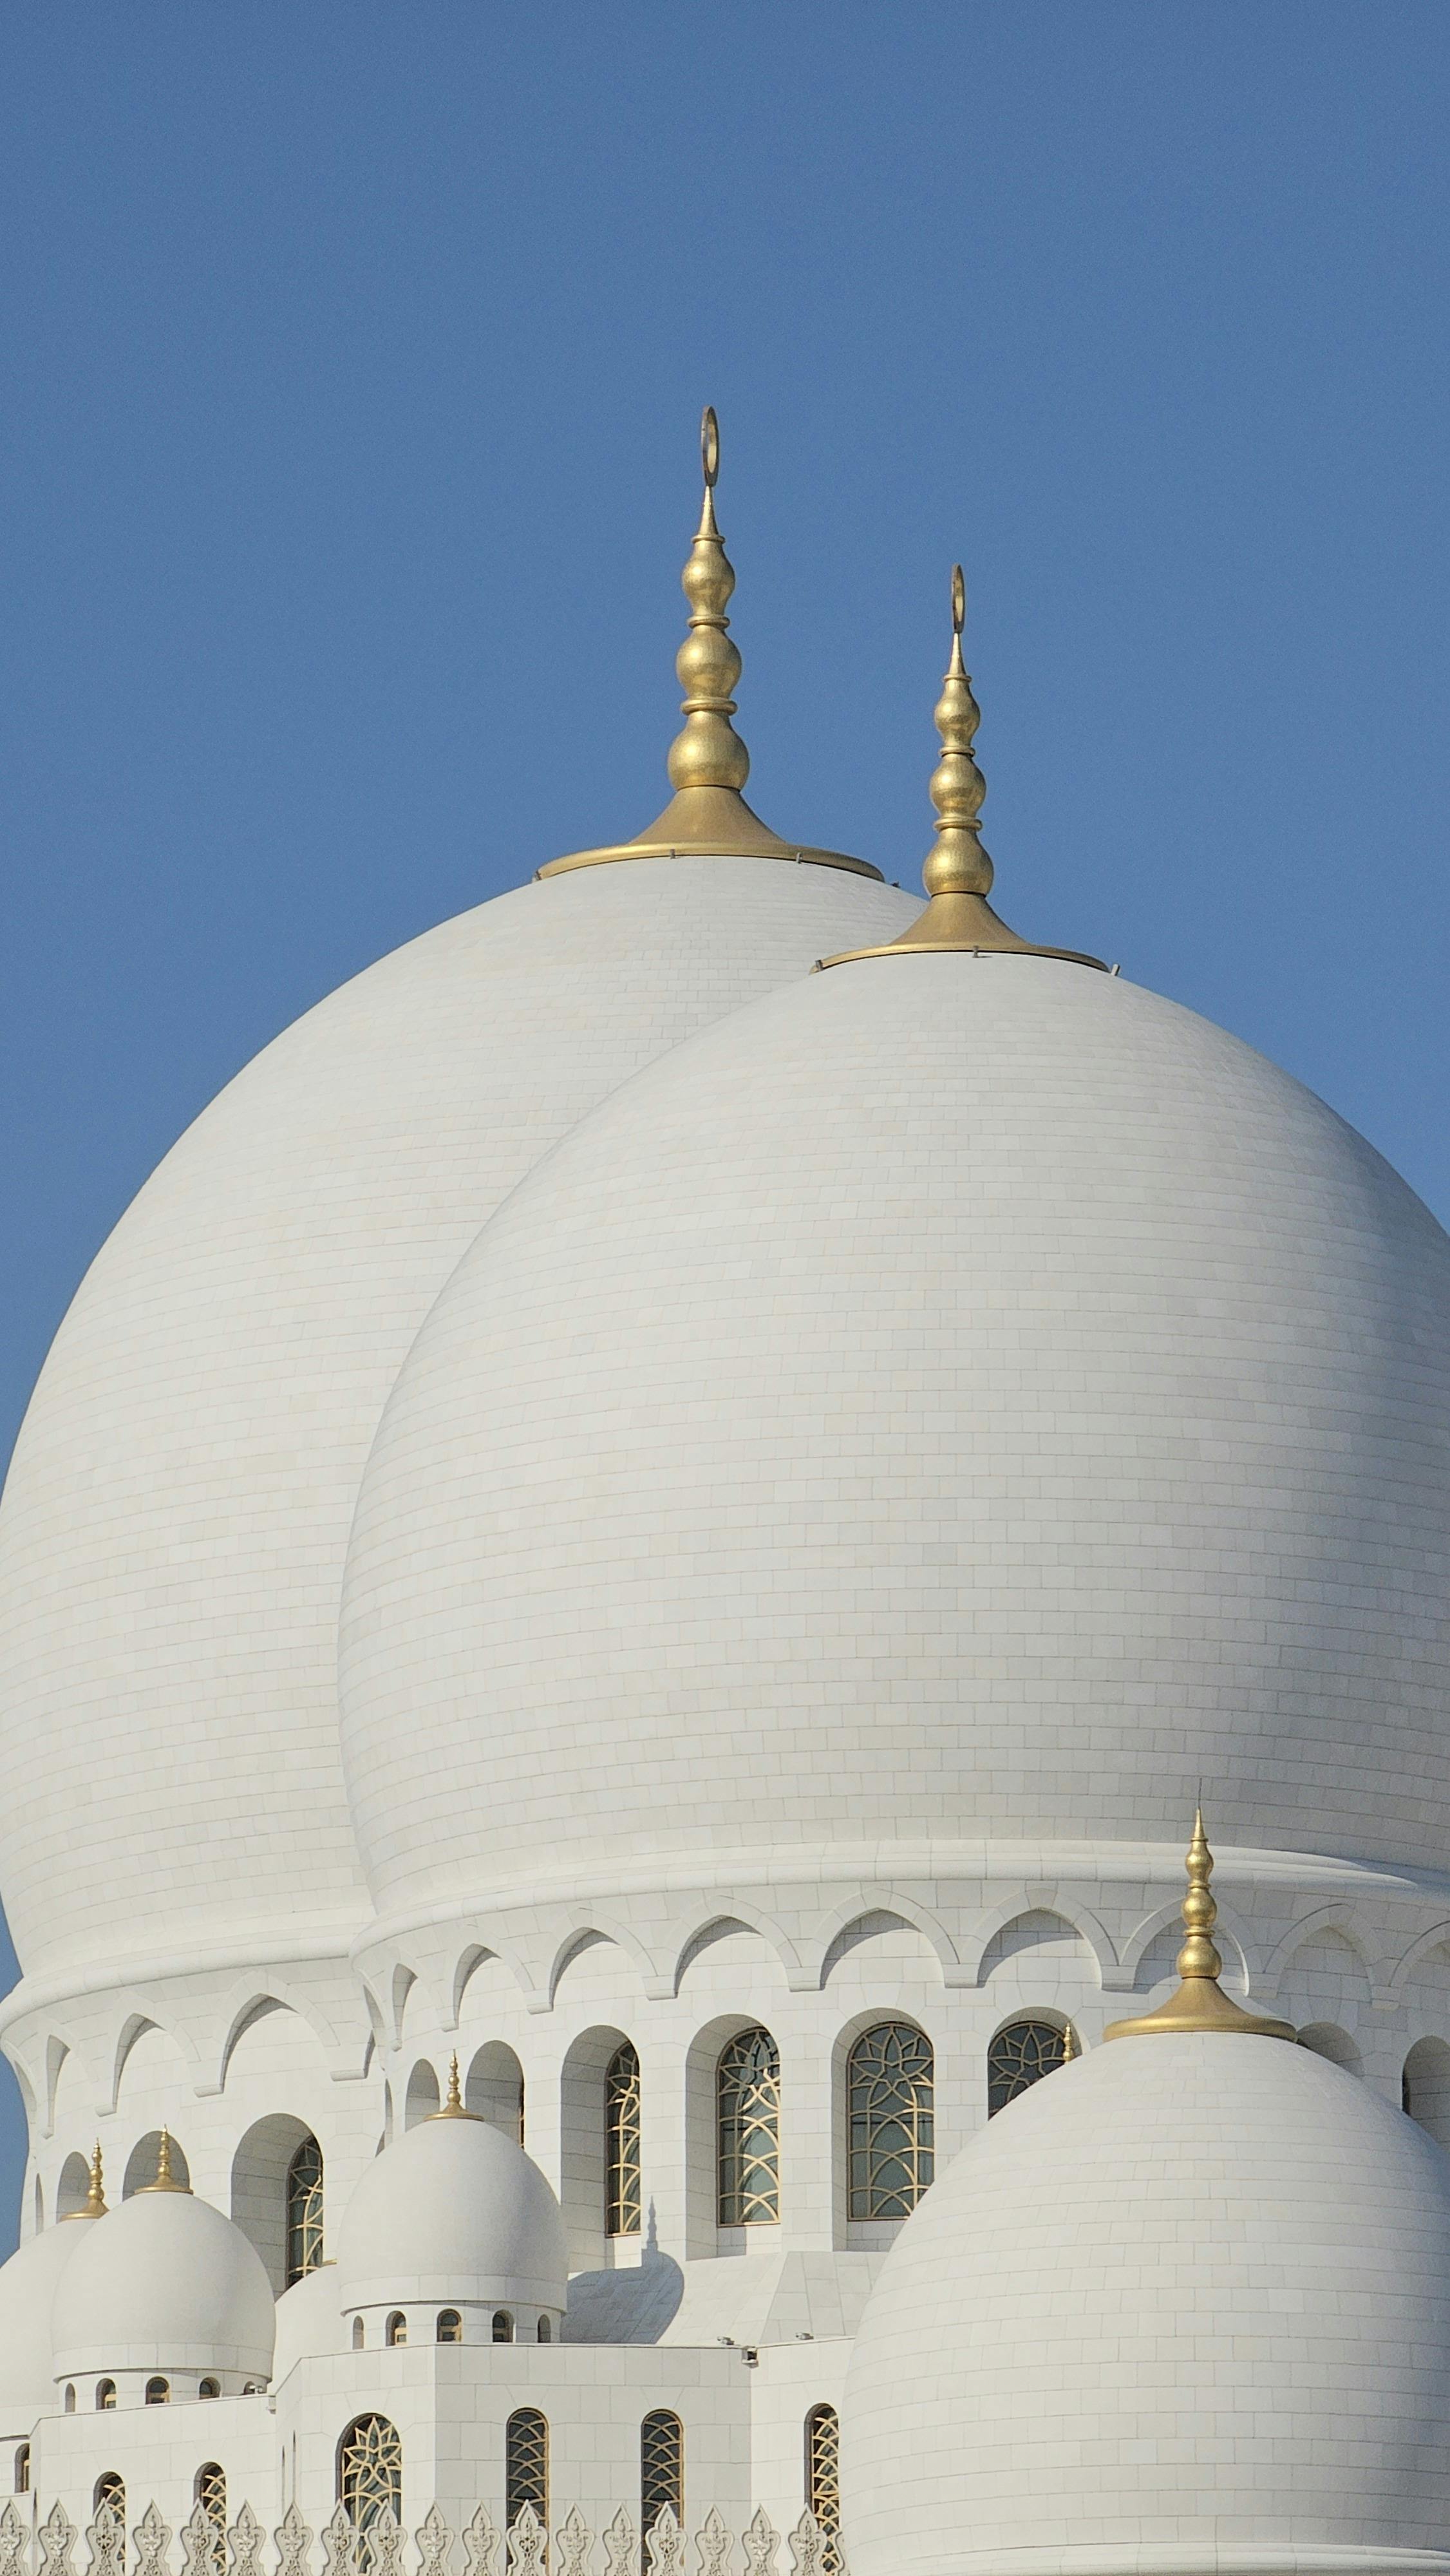 domes of sheikh zayed grand mosque in abu dhabi